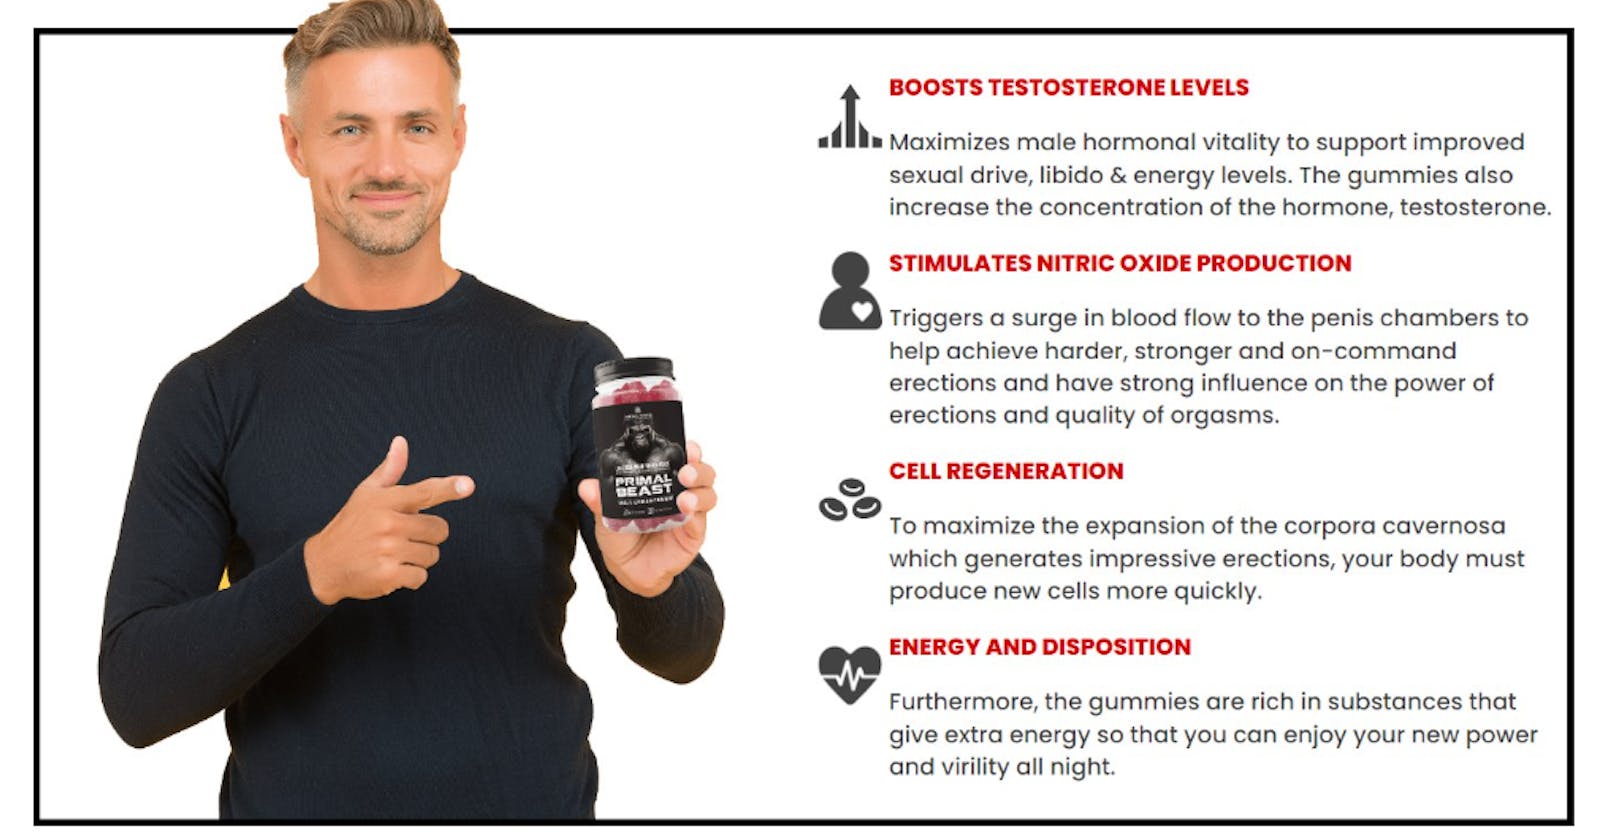 Primal Beast Male Enhancement For Sex?